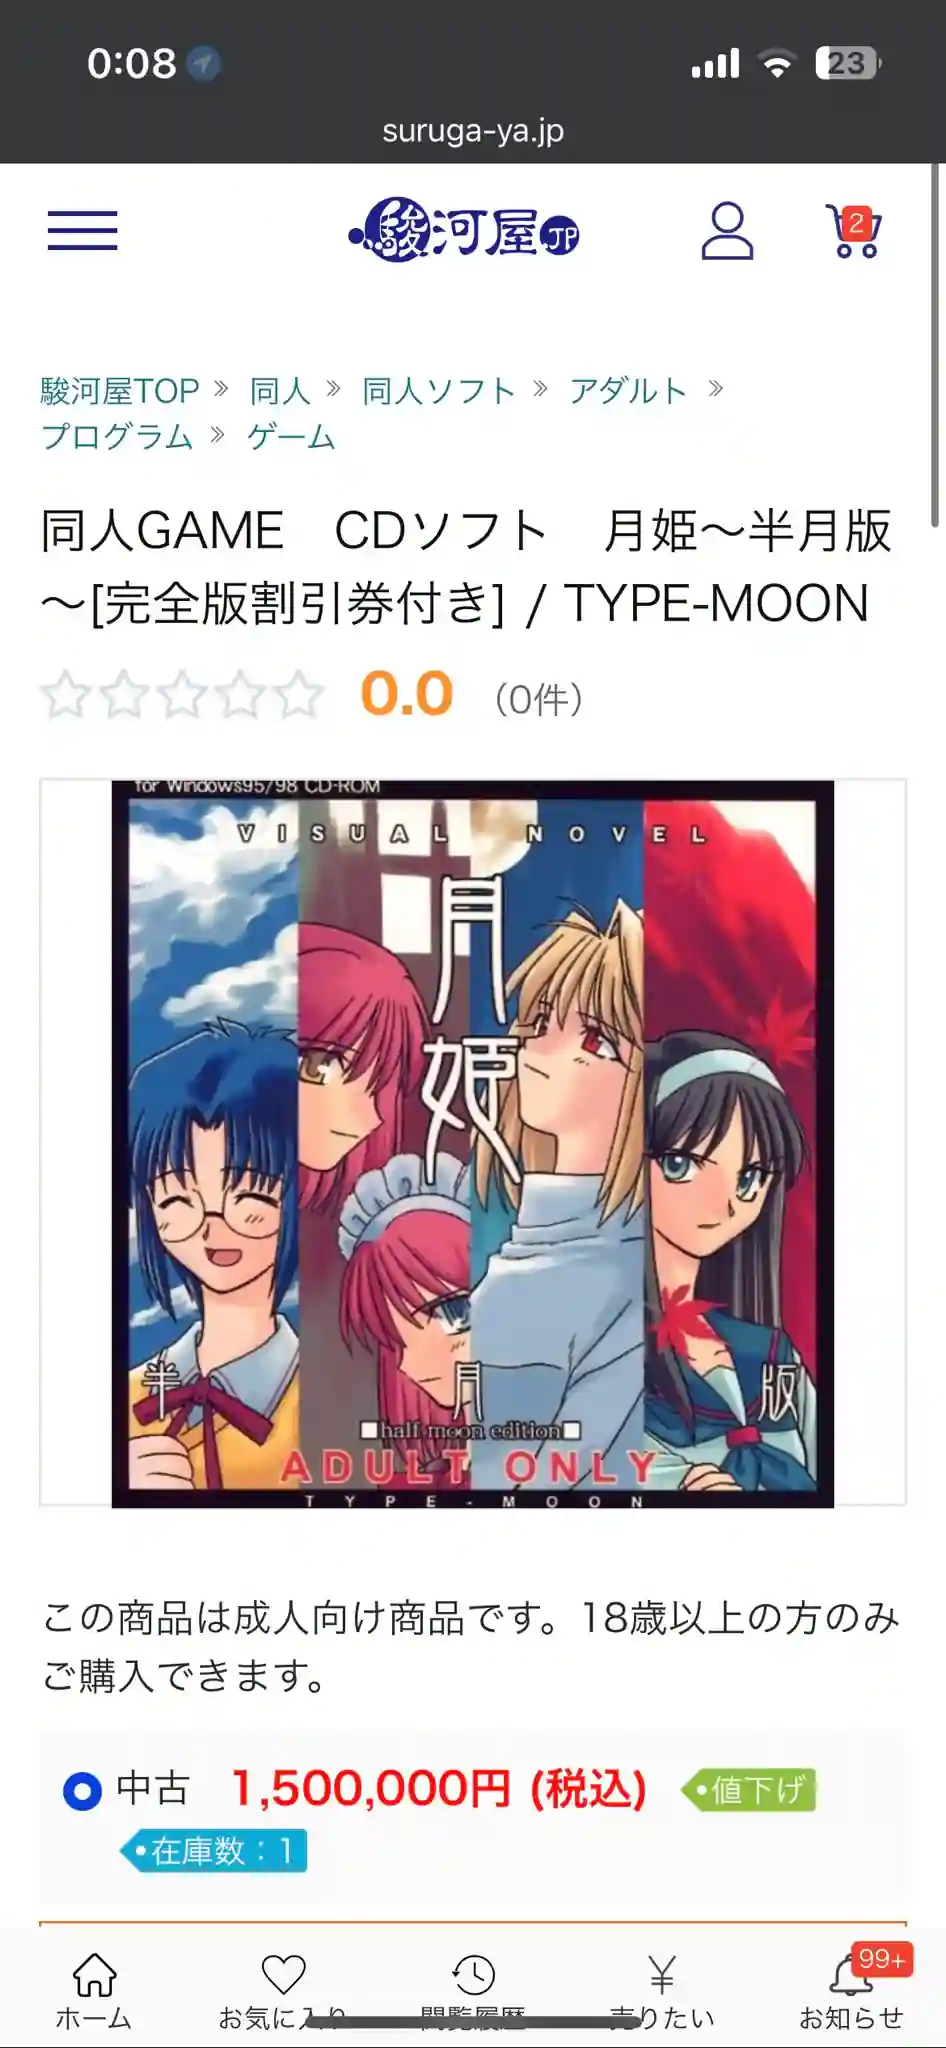 Classic Tsukihime visual novel is being sold for 1.5 million yen